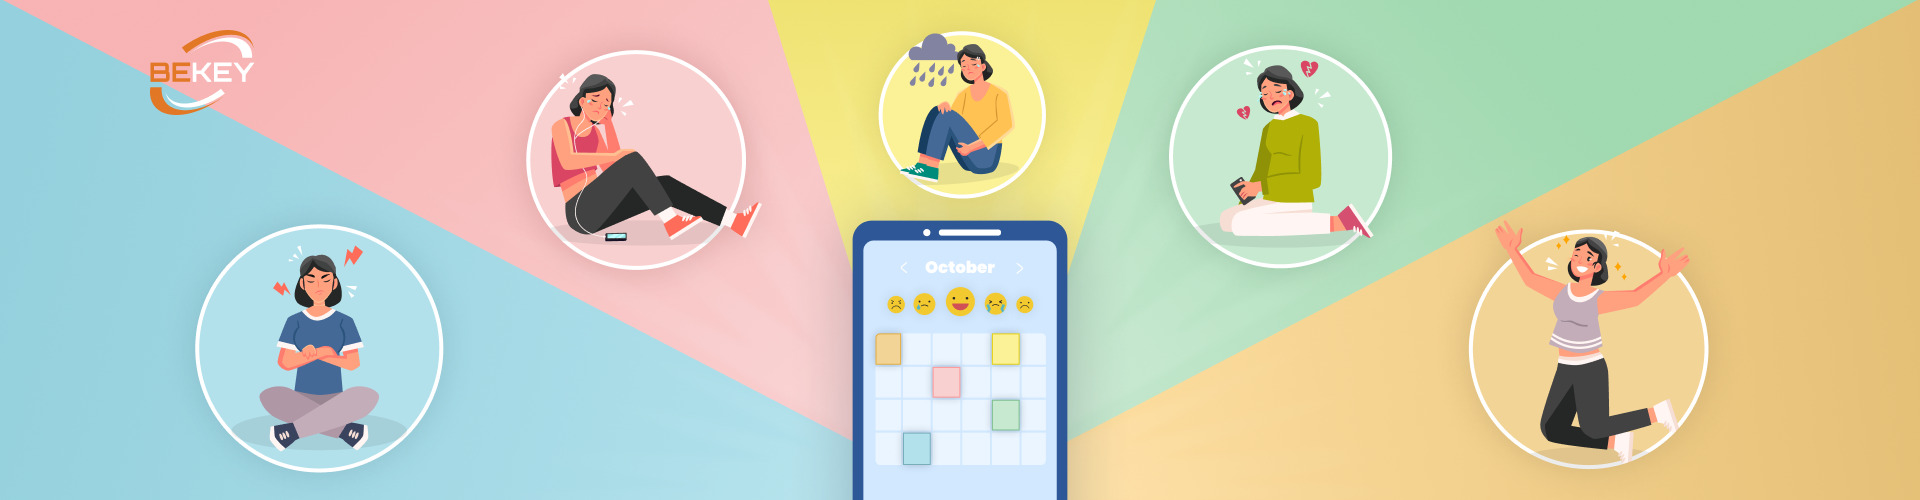 Building a Mood Tracker for Digital Health: a Quick Guide - image